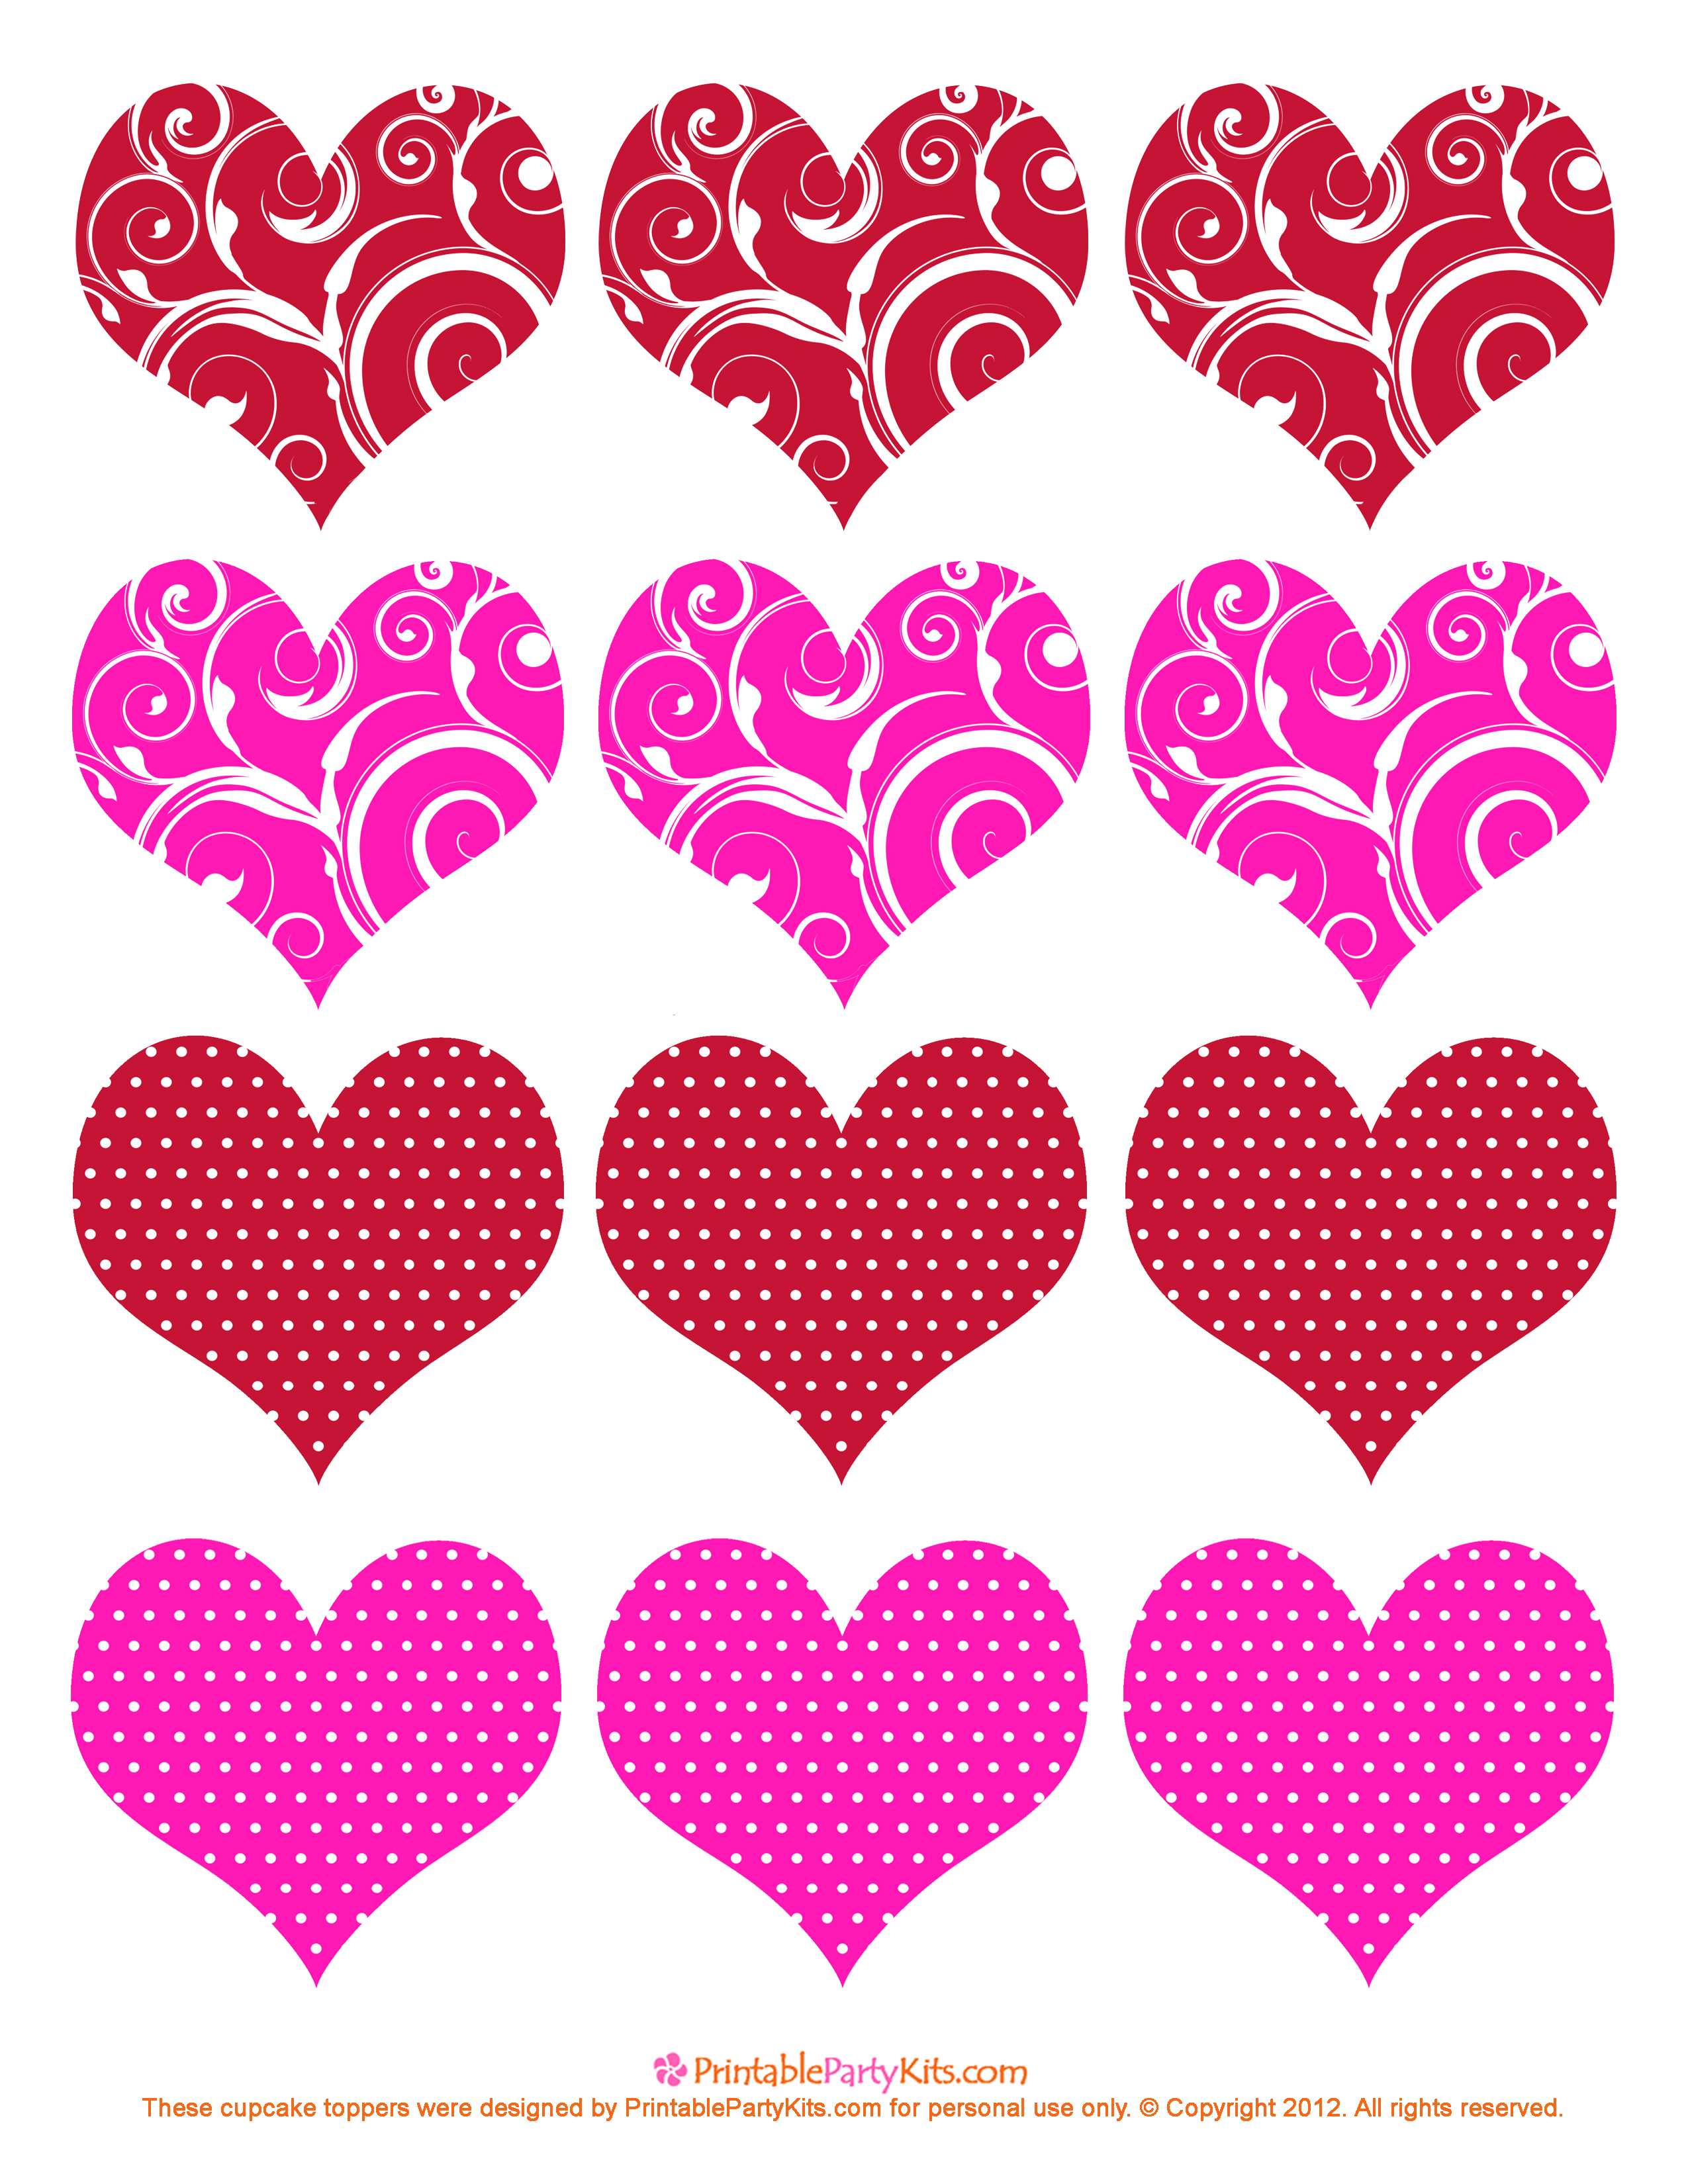 11 Valentine Heart Template Images - Free Printable Valentine Hearts - Free Printable Heart Templates